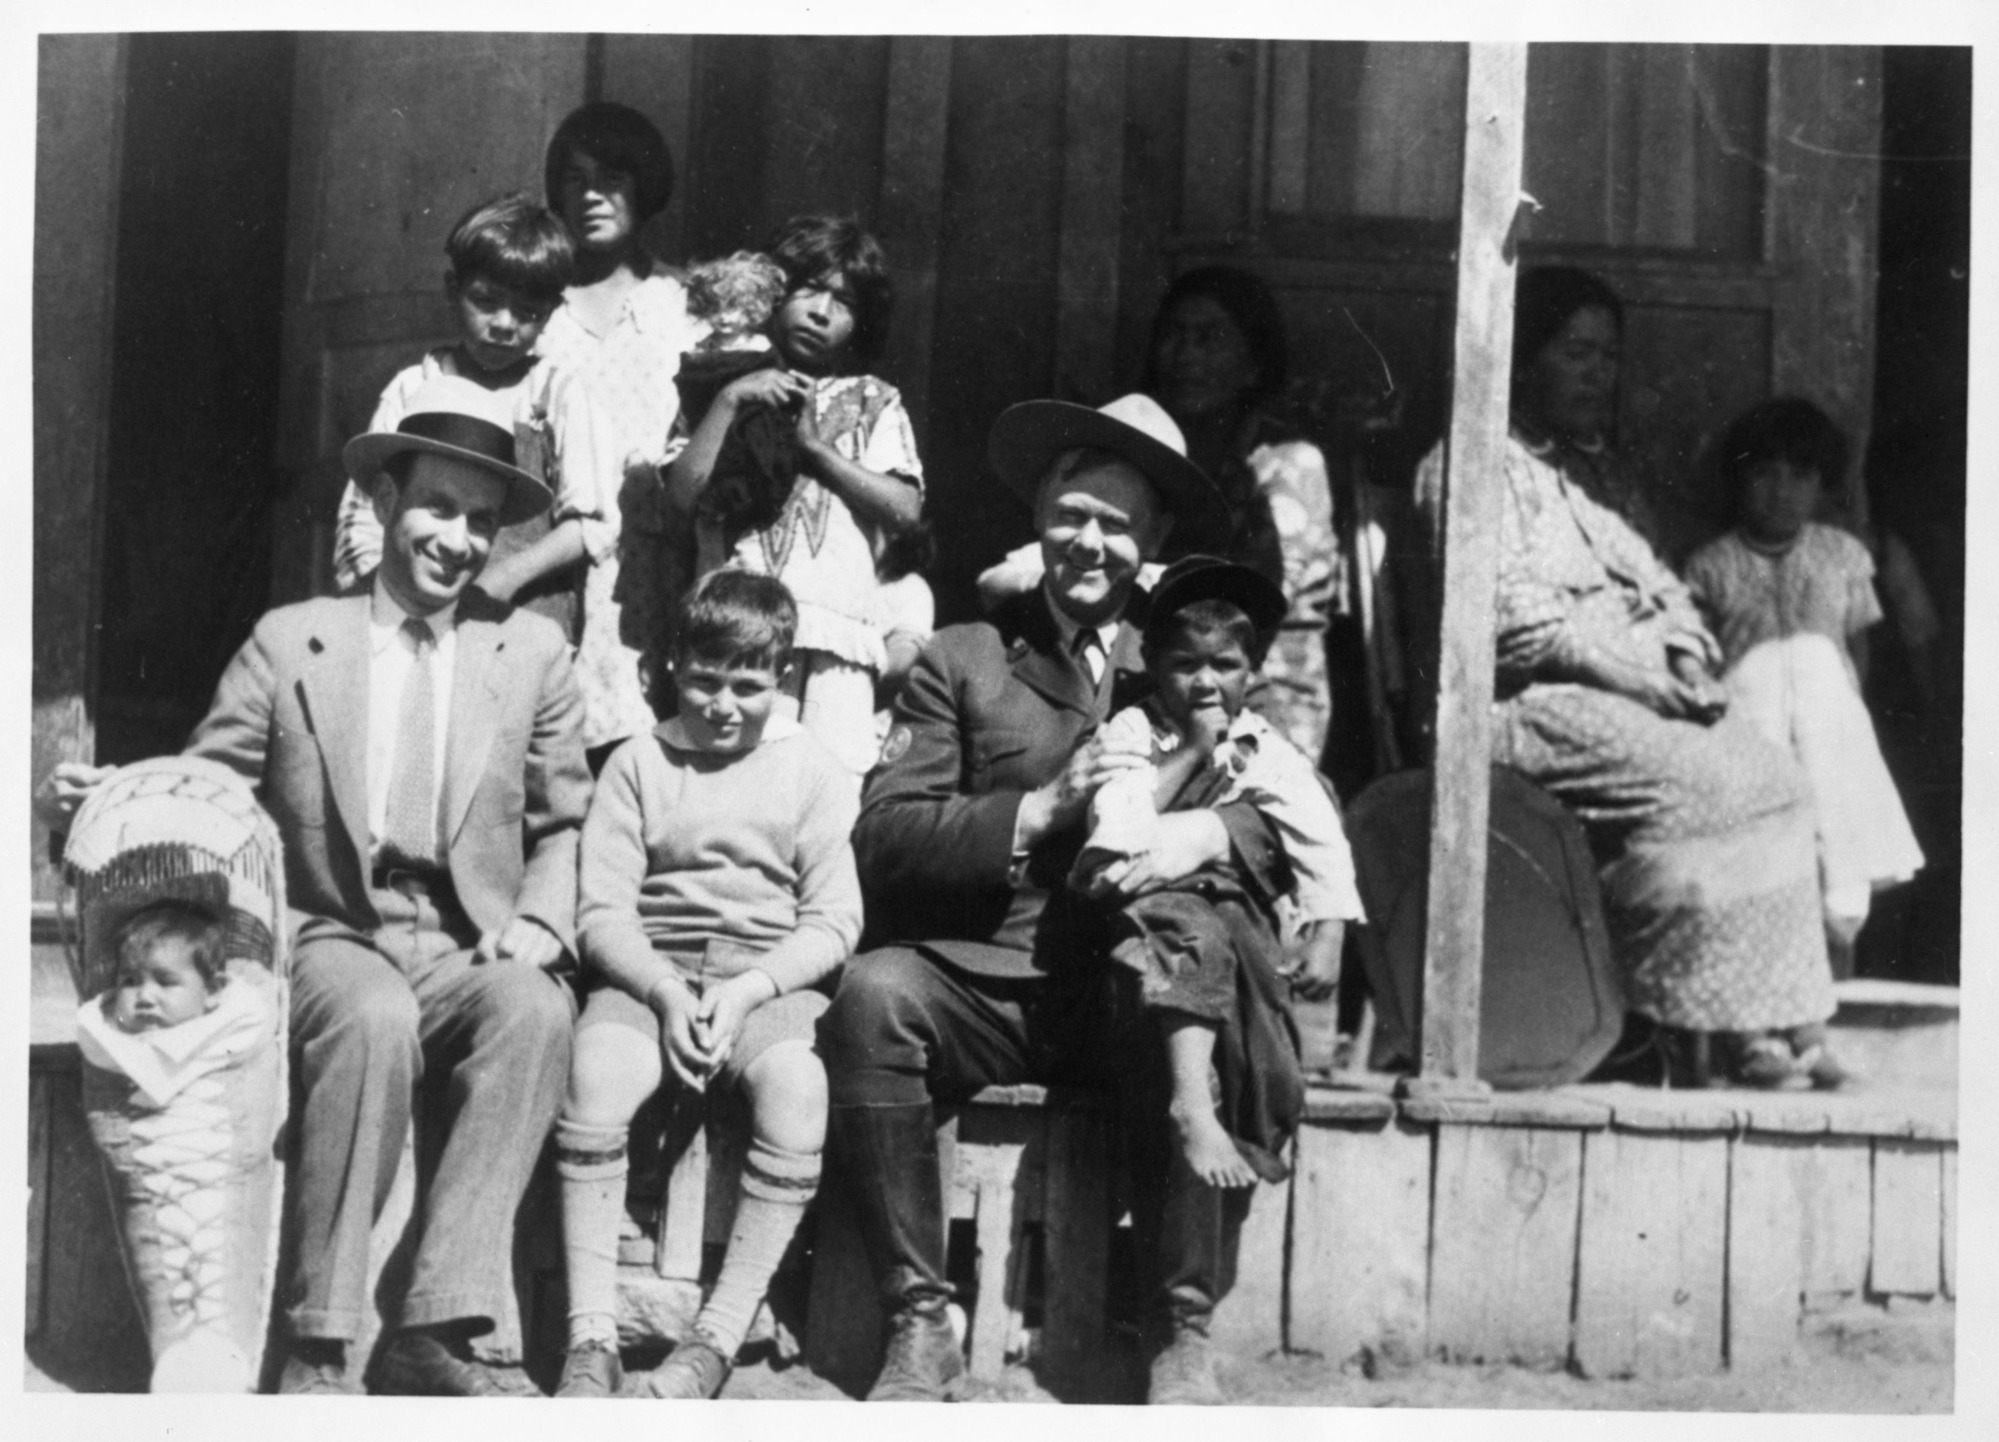 L to R: James Schwabacher, James Schwabacher, Jr. and Forrest Townsley with Mono Lake Native Americans (Dondero Family)